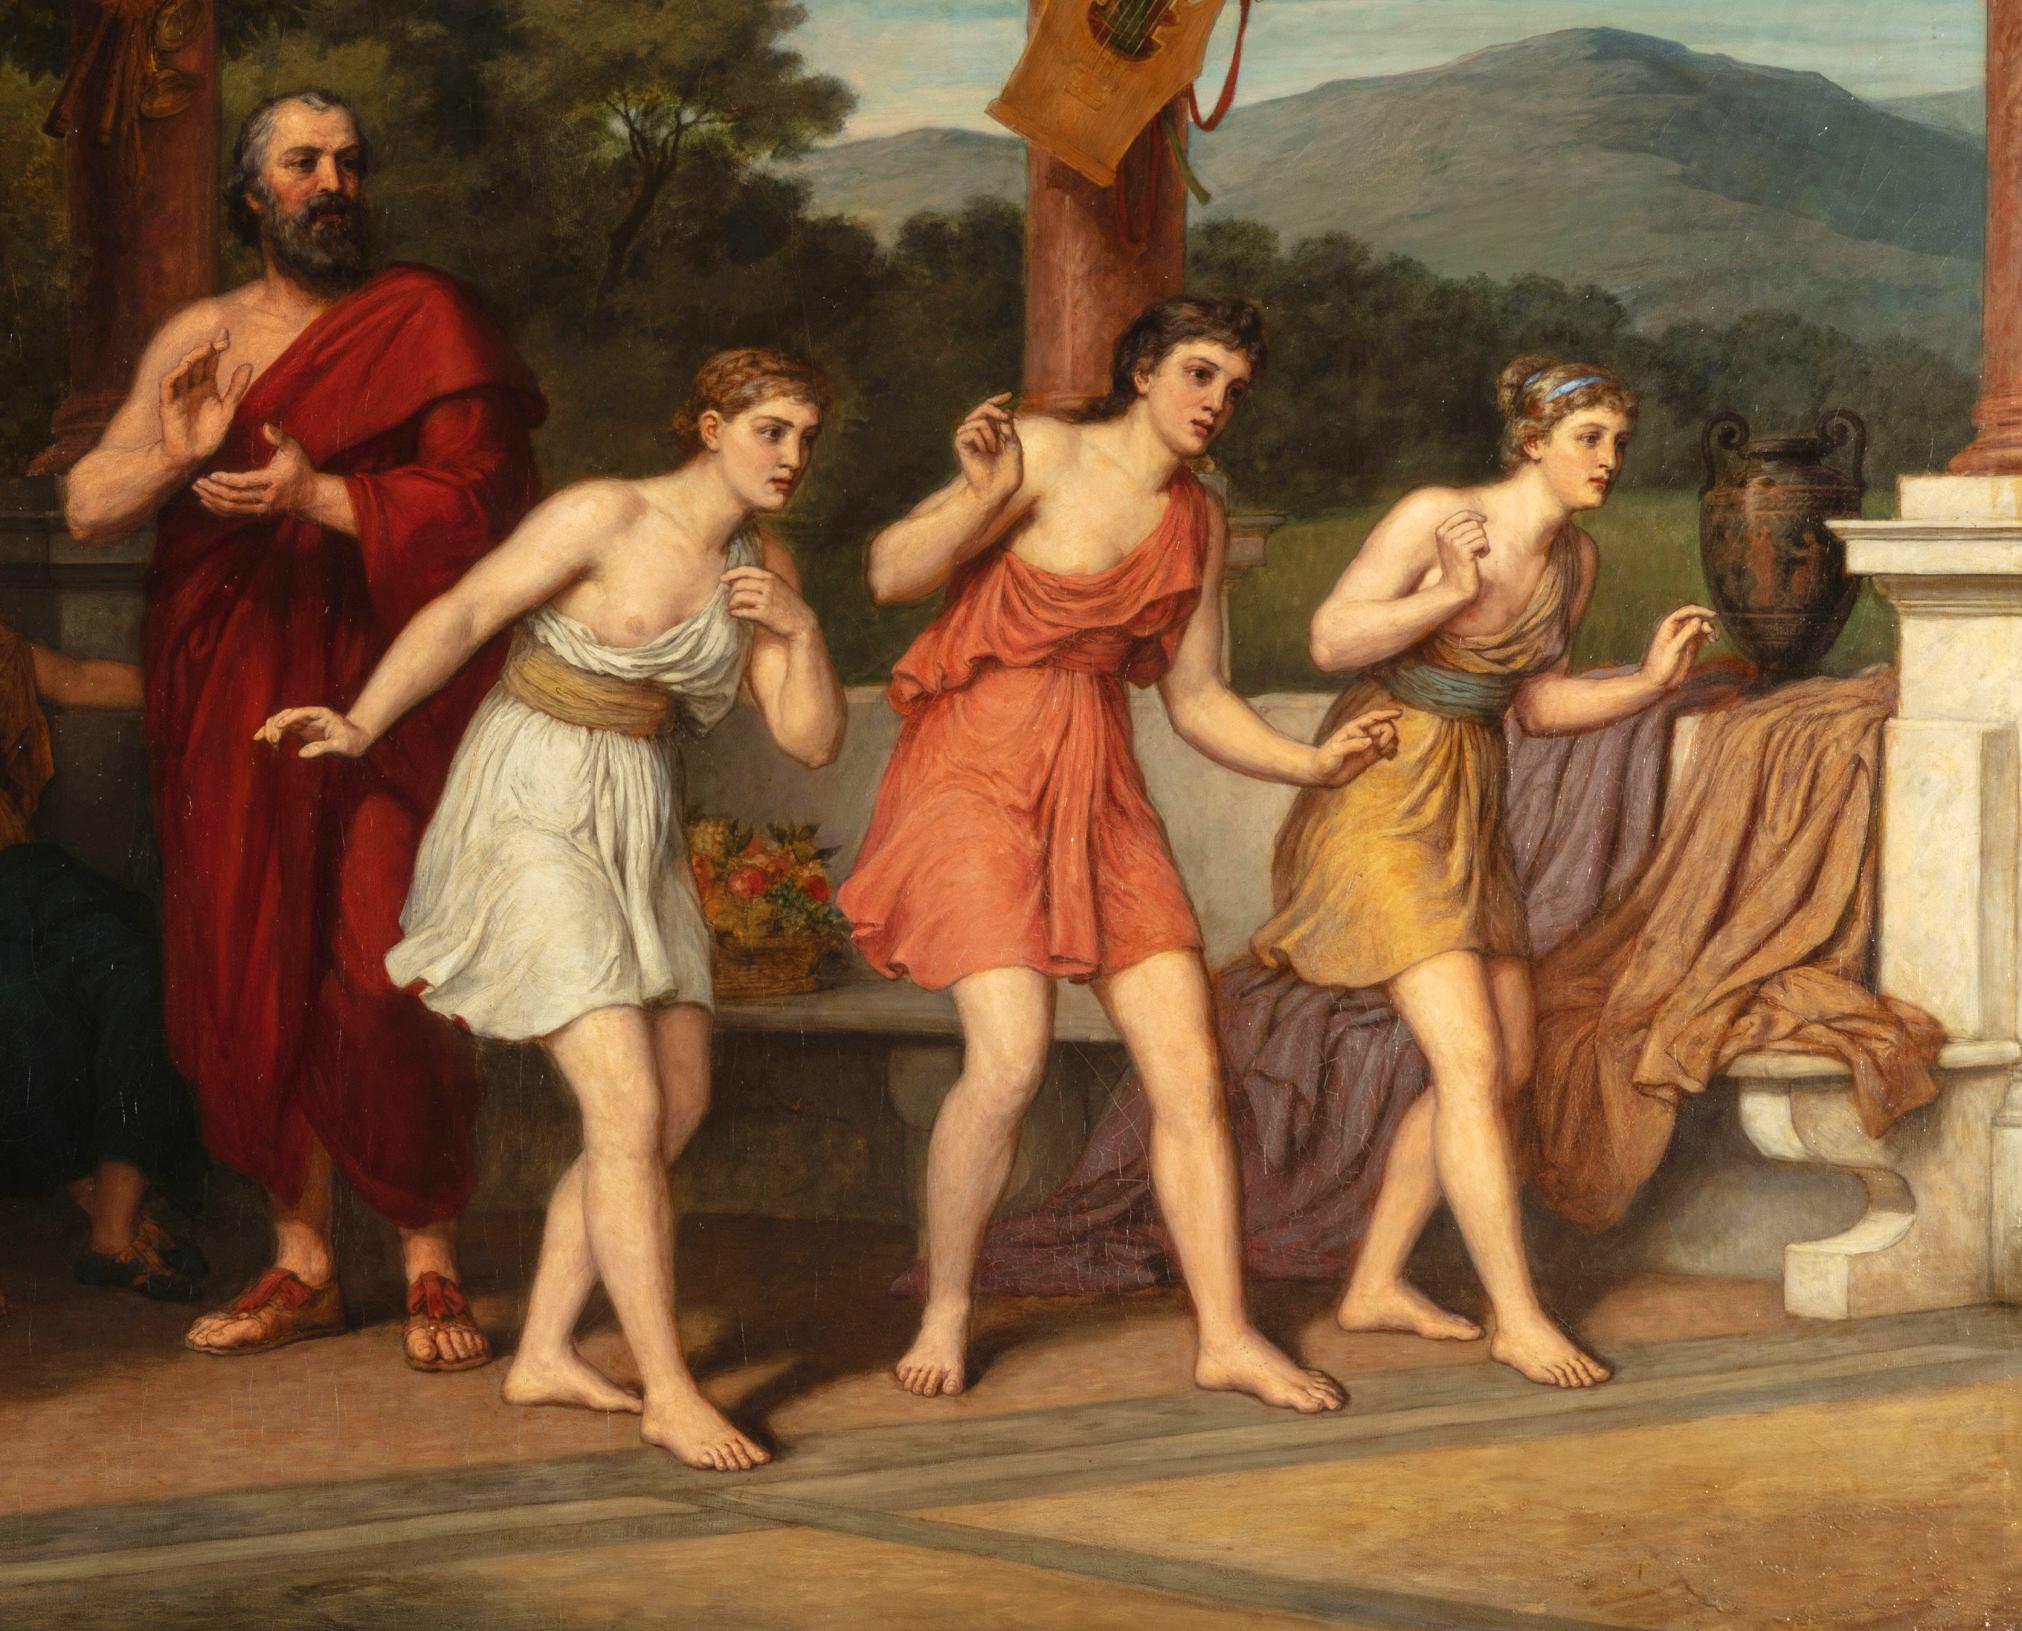 dance scene in Ancient Greece.
19th century, oil on canvas, signed at the bottom left
Measures: With frame: L 187 x H 129 x 10.5 cm
Without frame: L 155.5 x H 100

The painting, of remarkable dimensions and of great decorative effect, represents